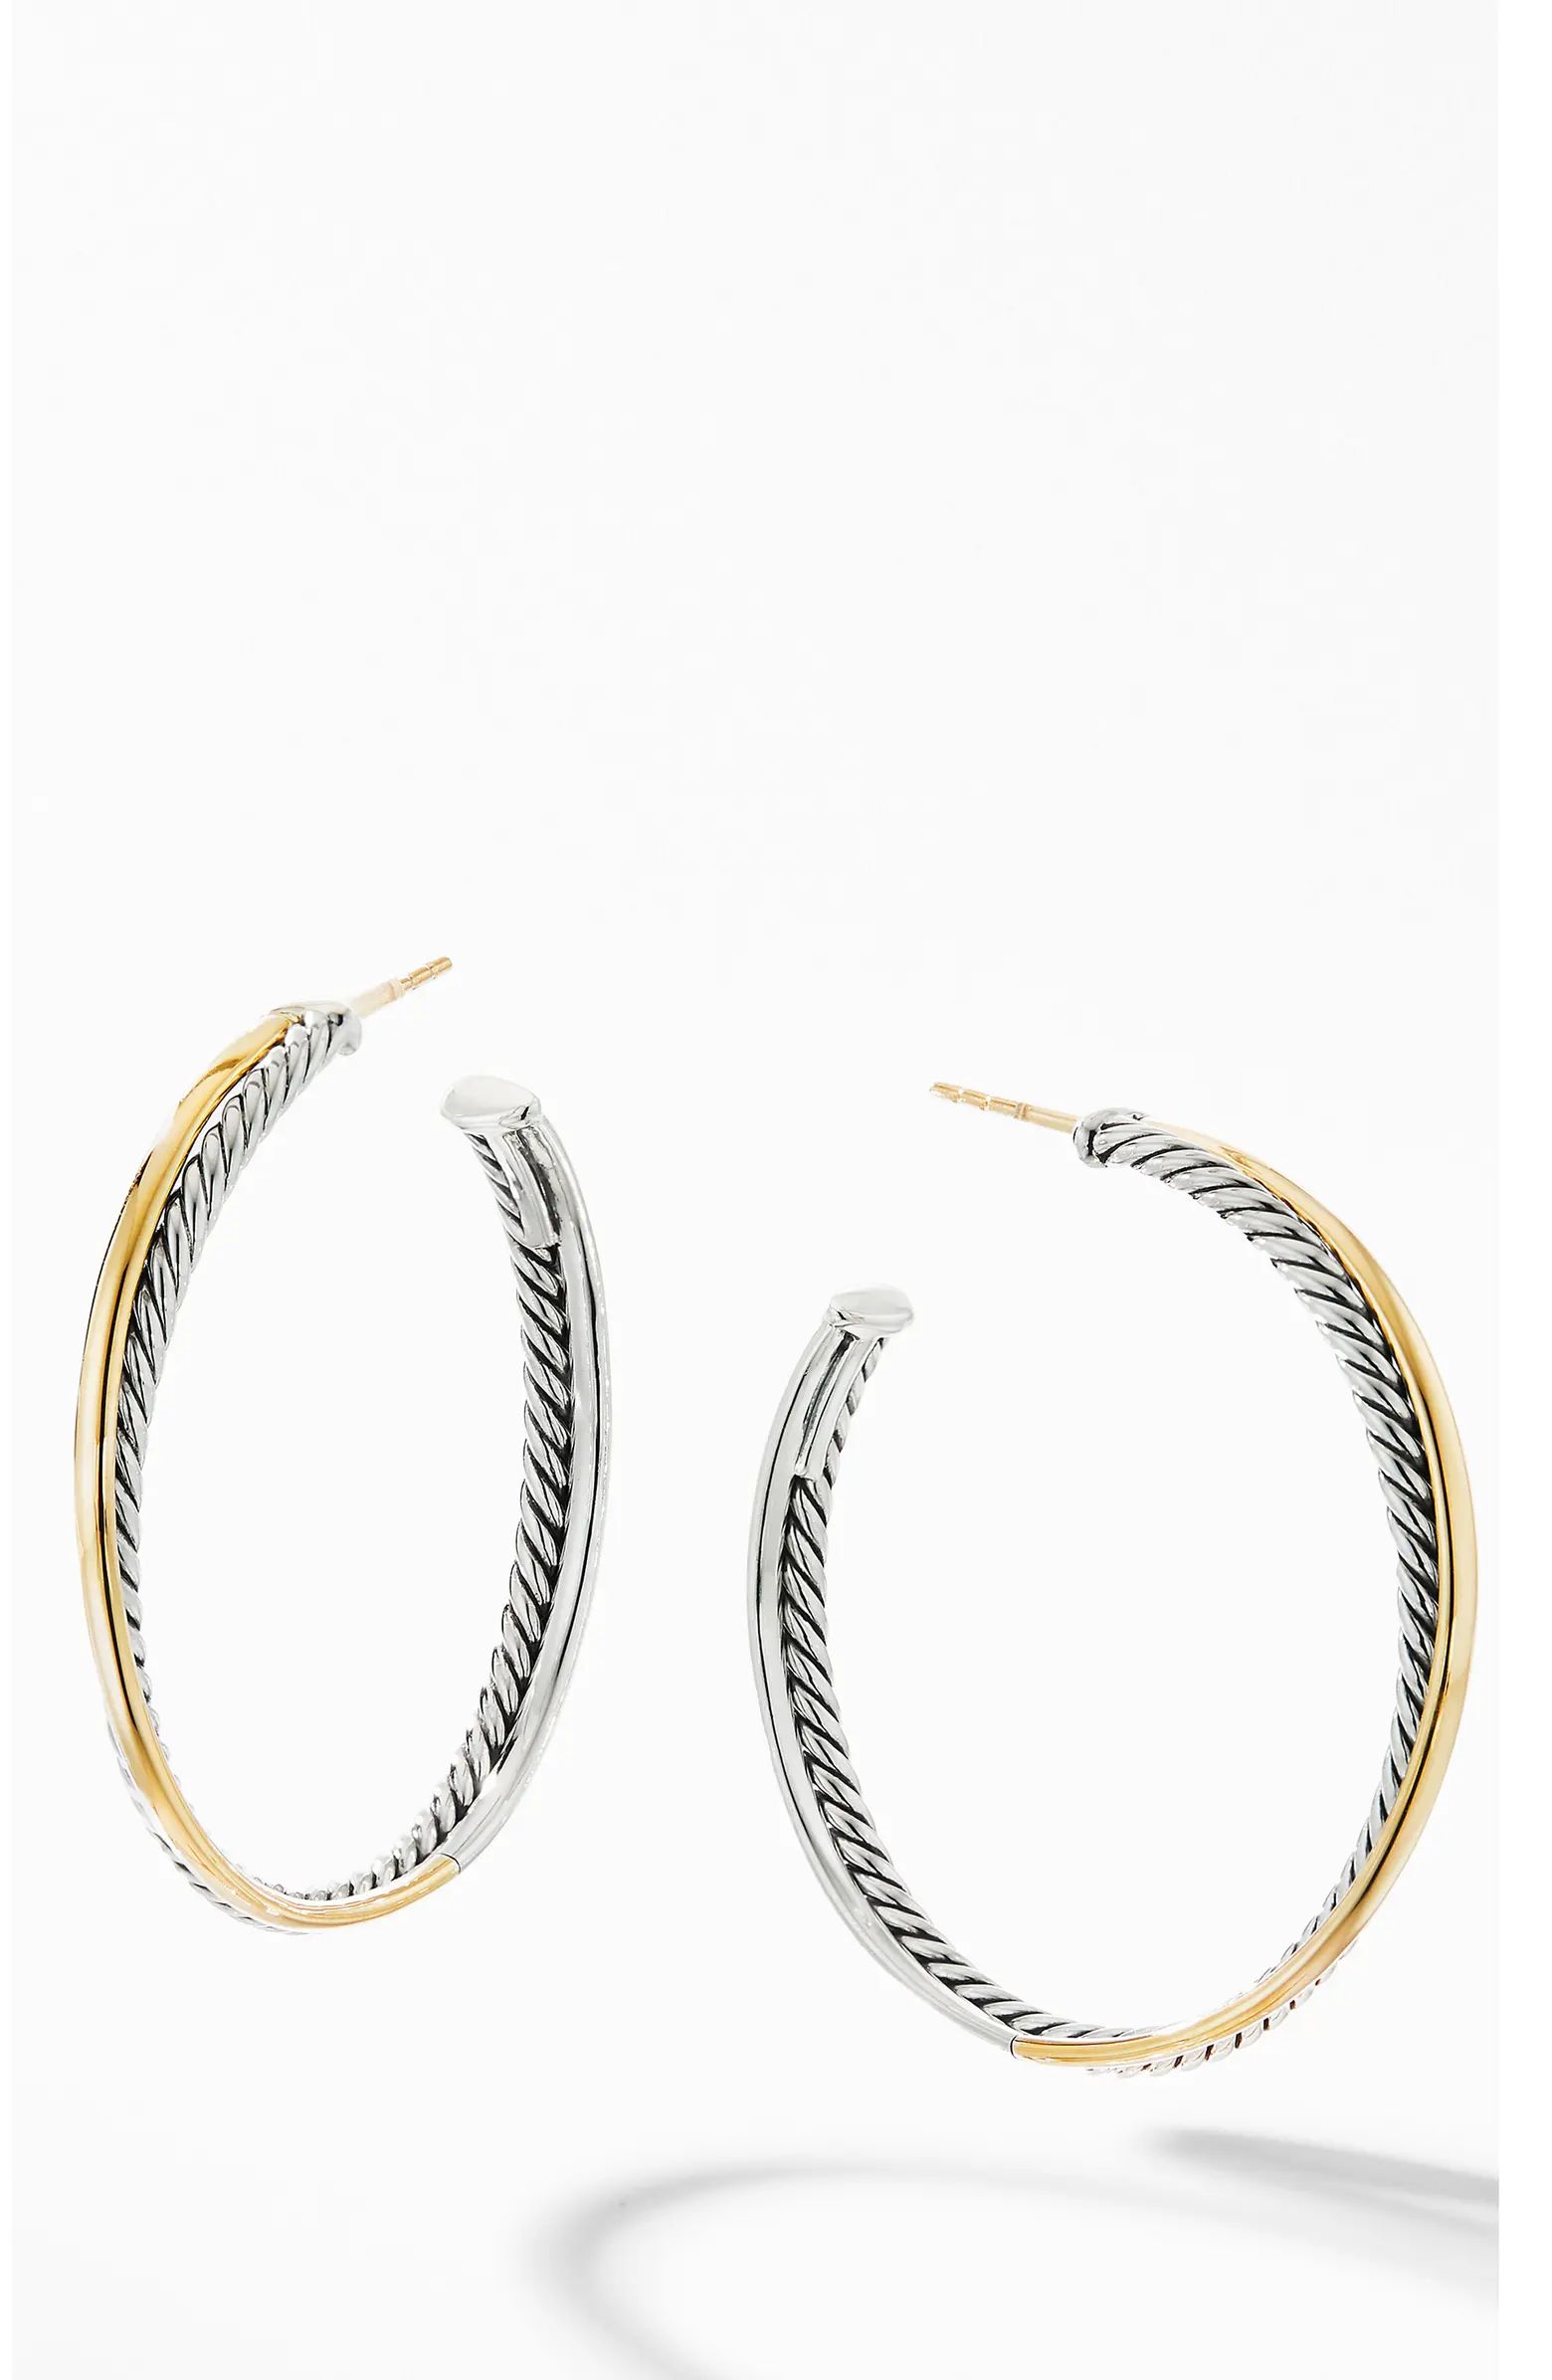 Crossover® XL Hoop Earrings with 18K Yellow Gold | Nordstrom